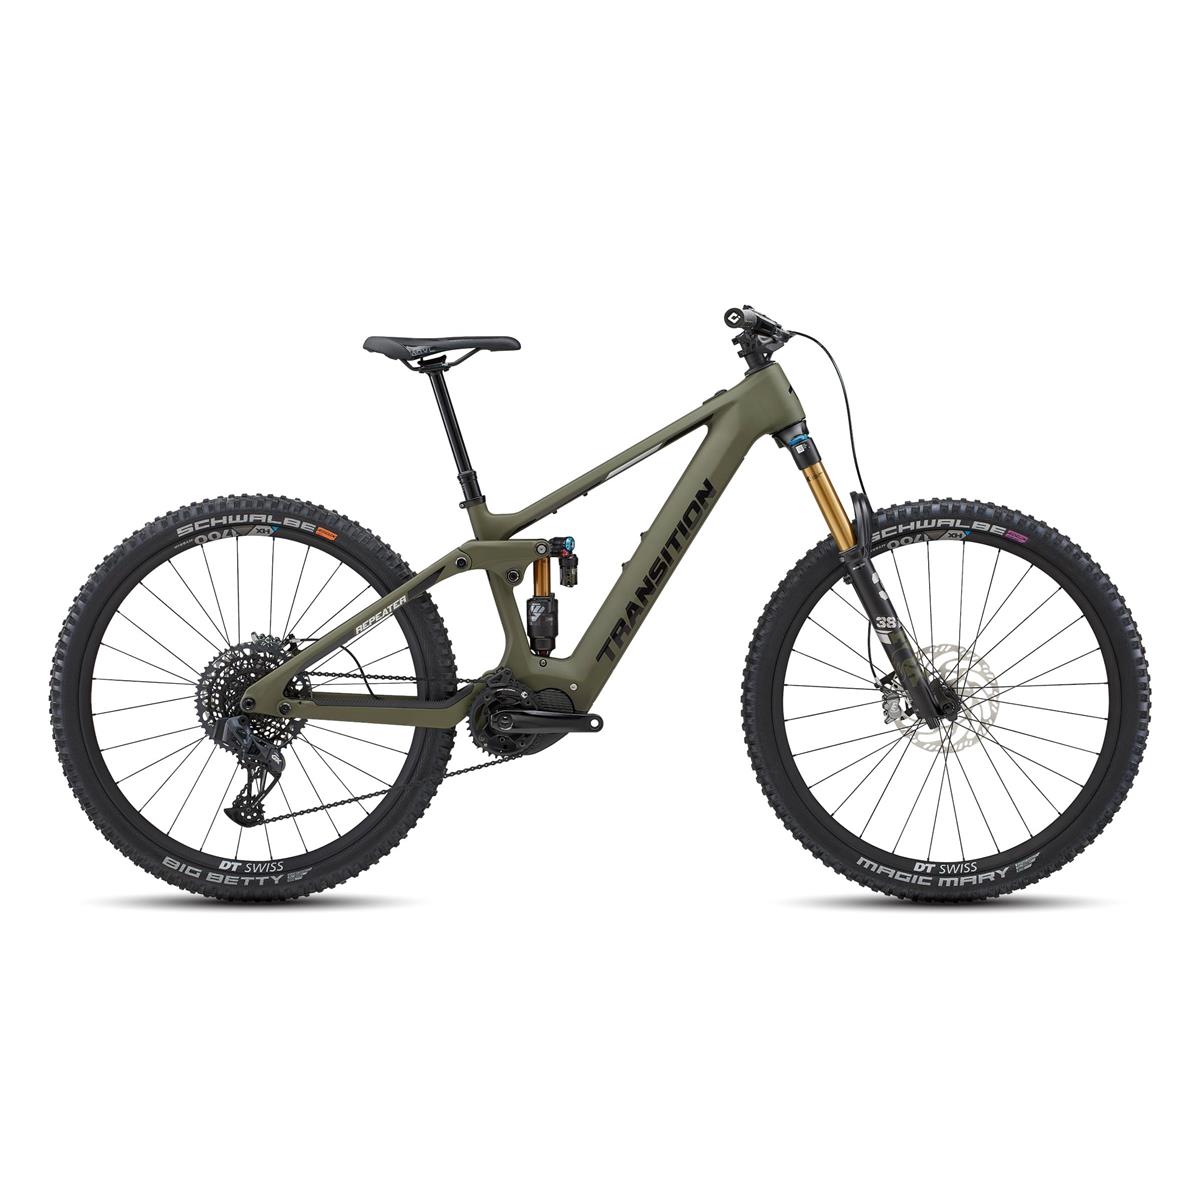 Repeater Carbon AXS 29'' 160mm 12v 630Wh Shimano EP8 Mossy Green Taglia M